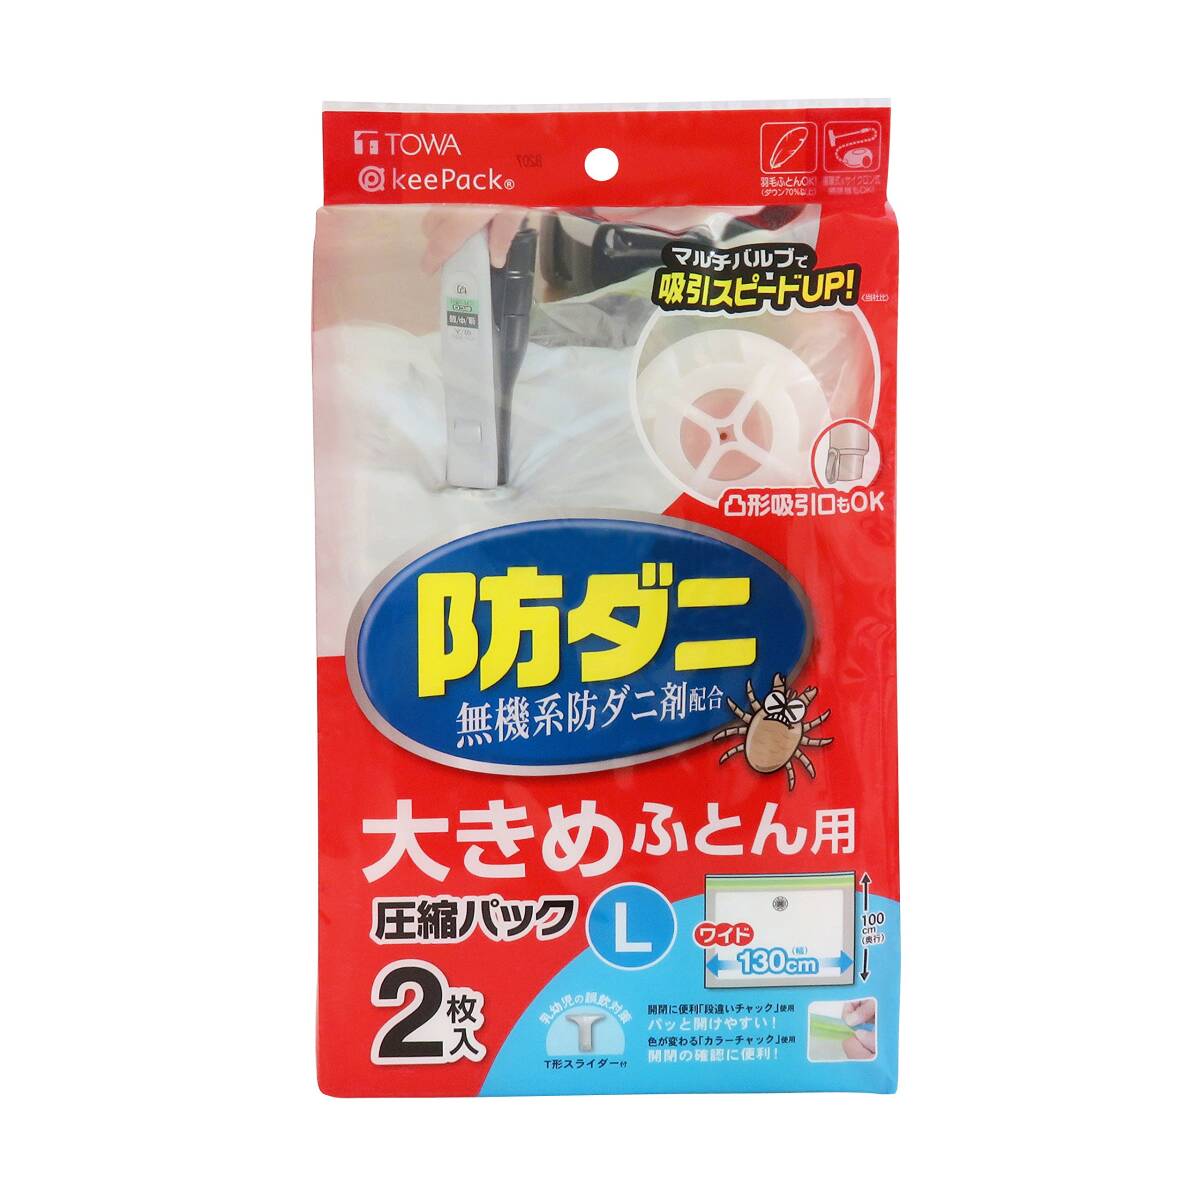  higashi peace industry vacuum bag . mites futon compression pack 2 sheets insertion L size 80583